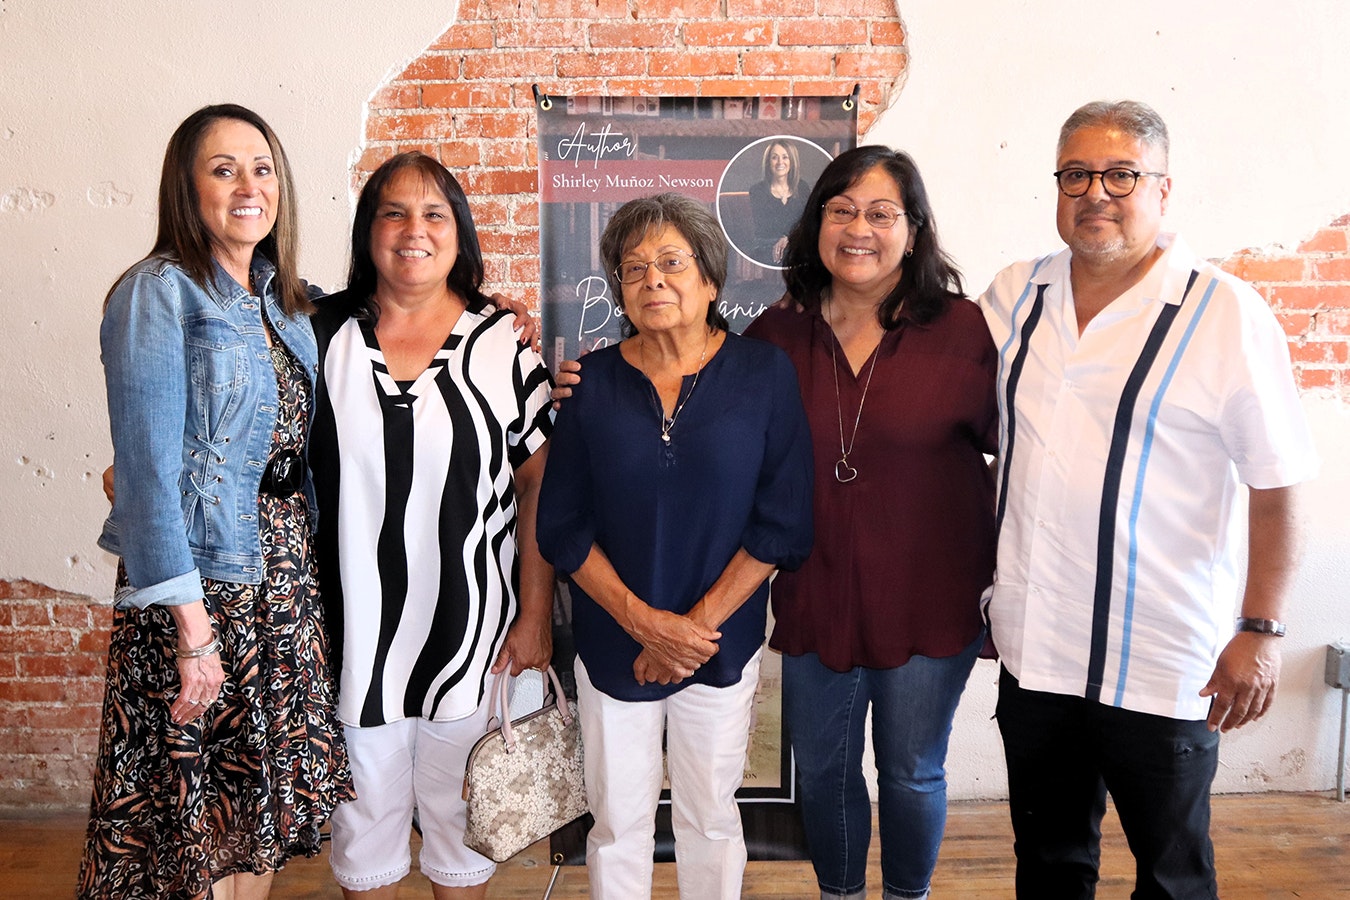 Shirely Munoz Newson, far left, with some members of her biological family, whom she didn't meet until after she learned before her 43rd birthday that she was switched at birth. They are, from left, cousin Brenda Munoz, aunt Mary Mercado, cousin Kim Accurso and cousin Nick Munoz.